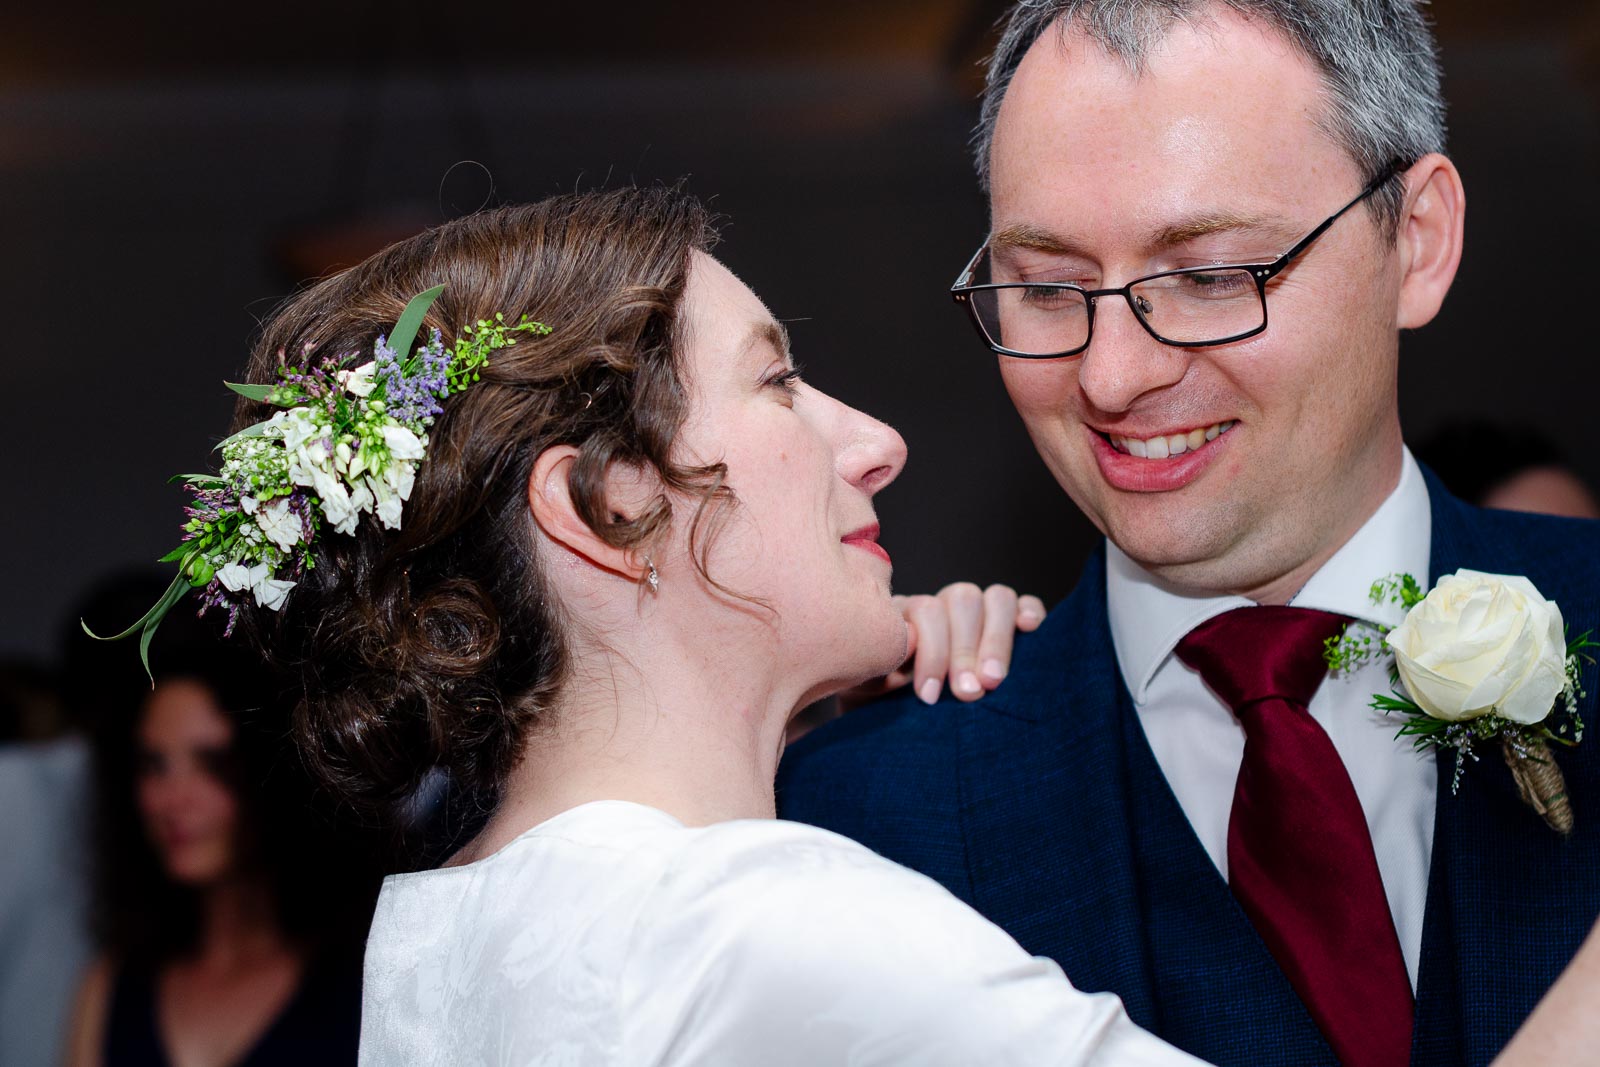 Alexis and Niell smile at eachother during their first dance in Pelham House Hotel, Lewes.